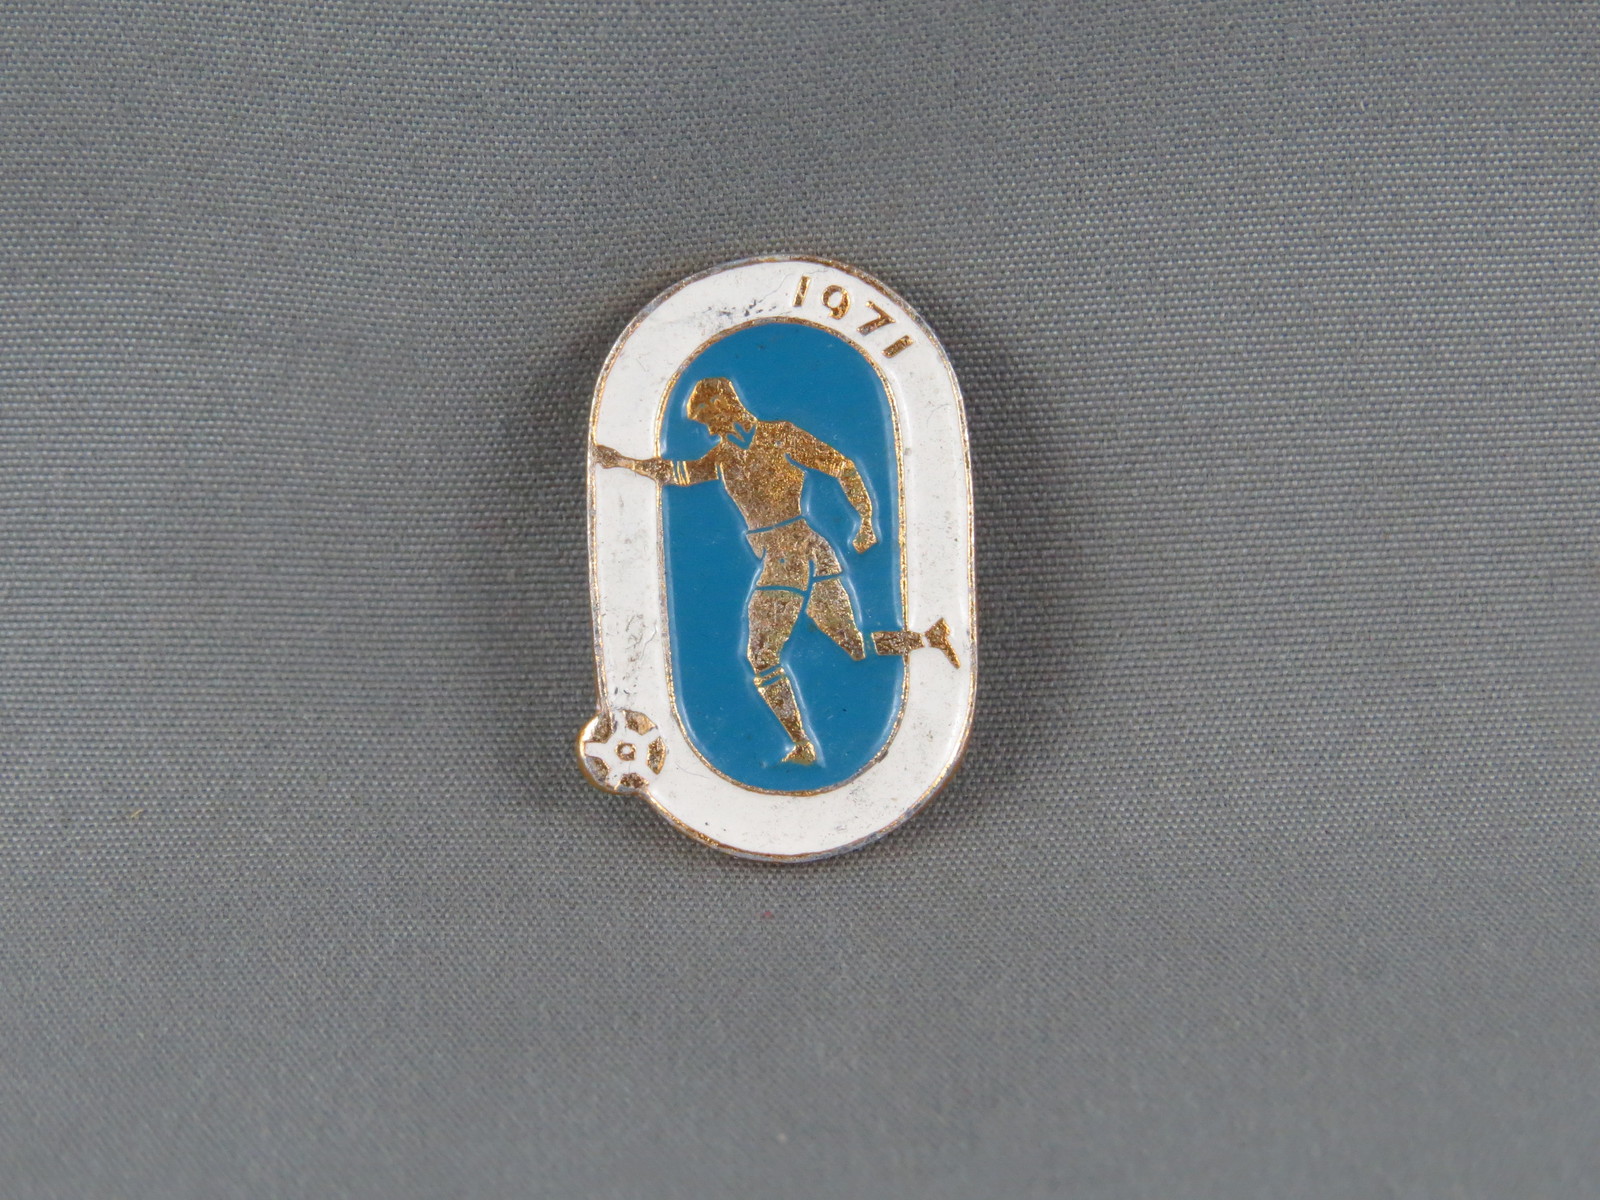 Primary image for Vintage Soviet Socer Pin - Dynamo Kyiv 1971 Champions - Stamped Pin 